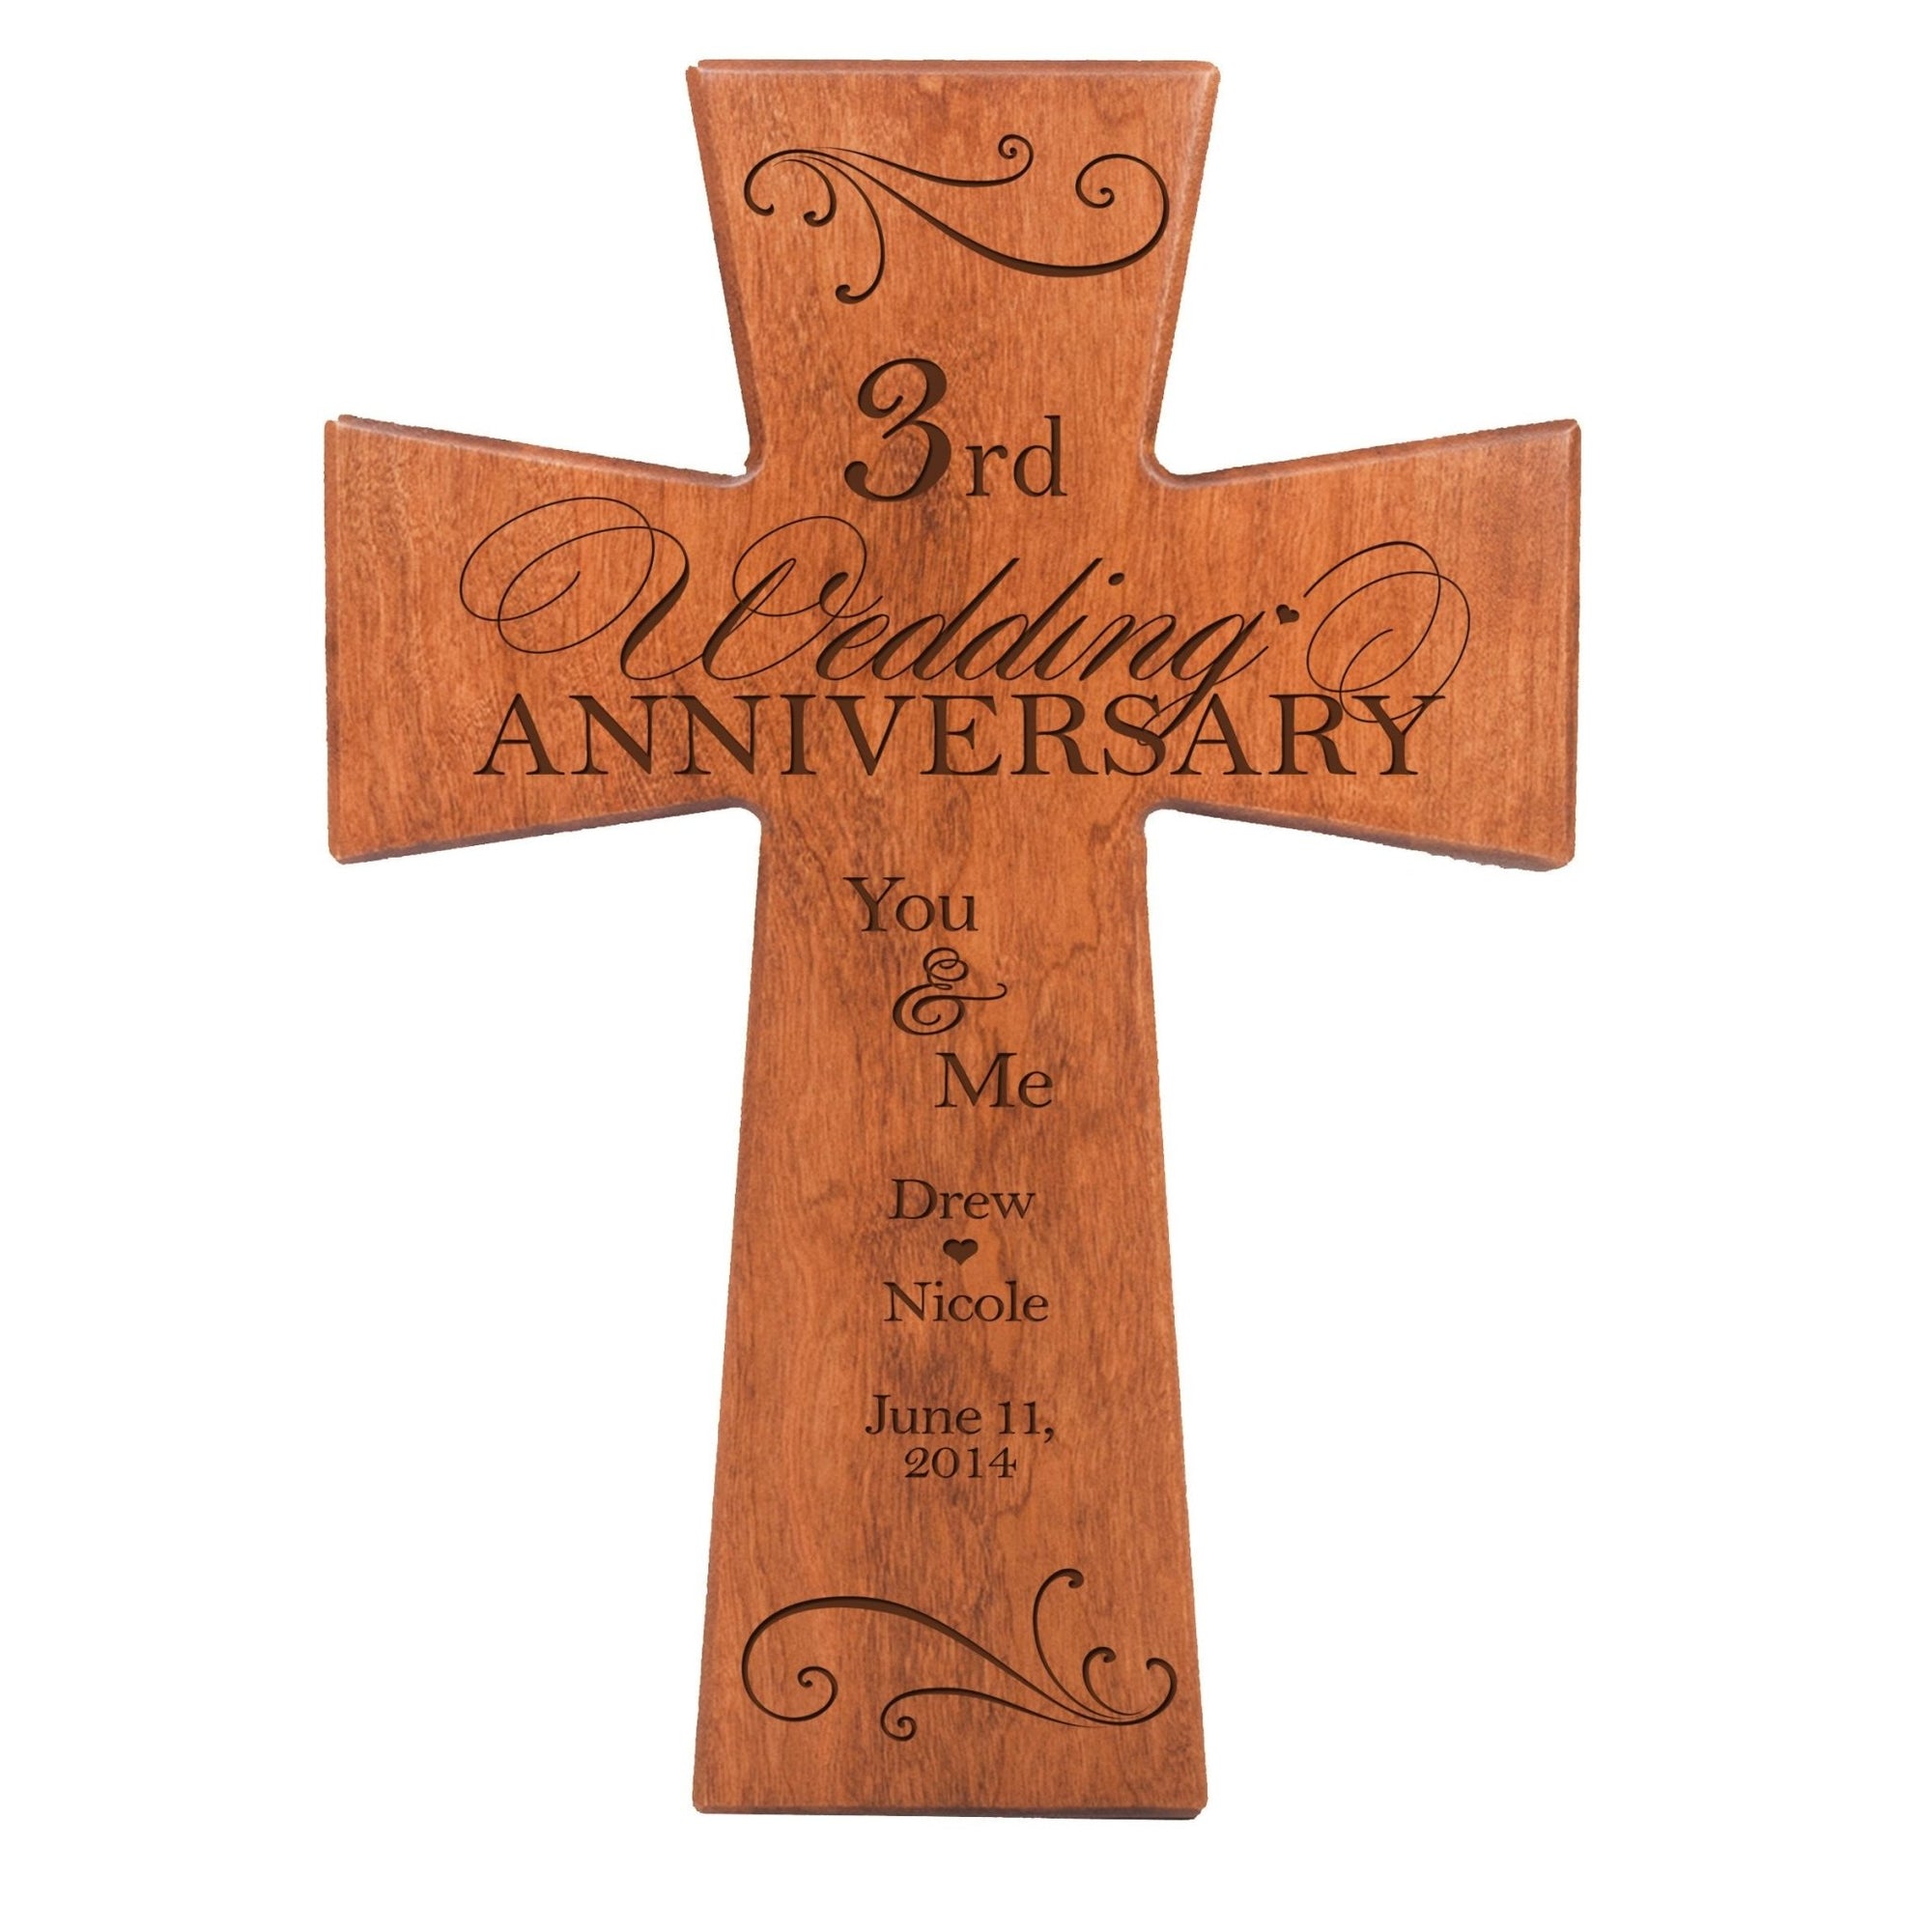 Personalized Wall Cross for 3rd Wedding Anniversary - You & Me - LifeSong Milestones